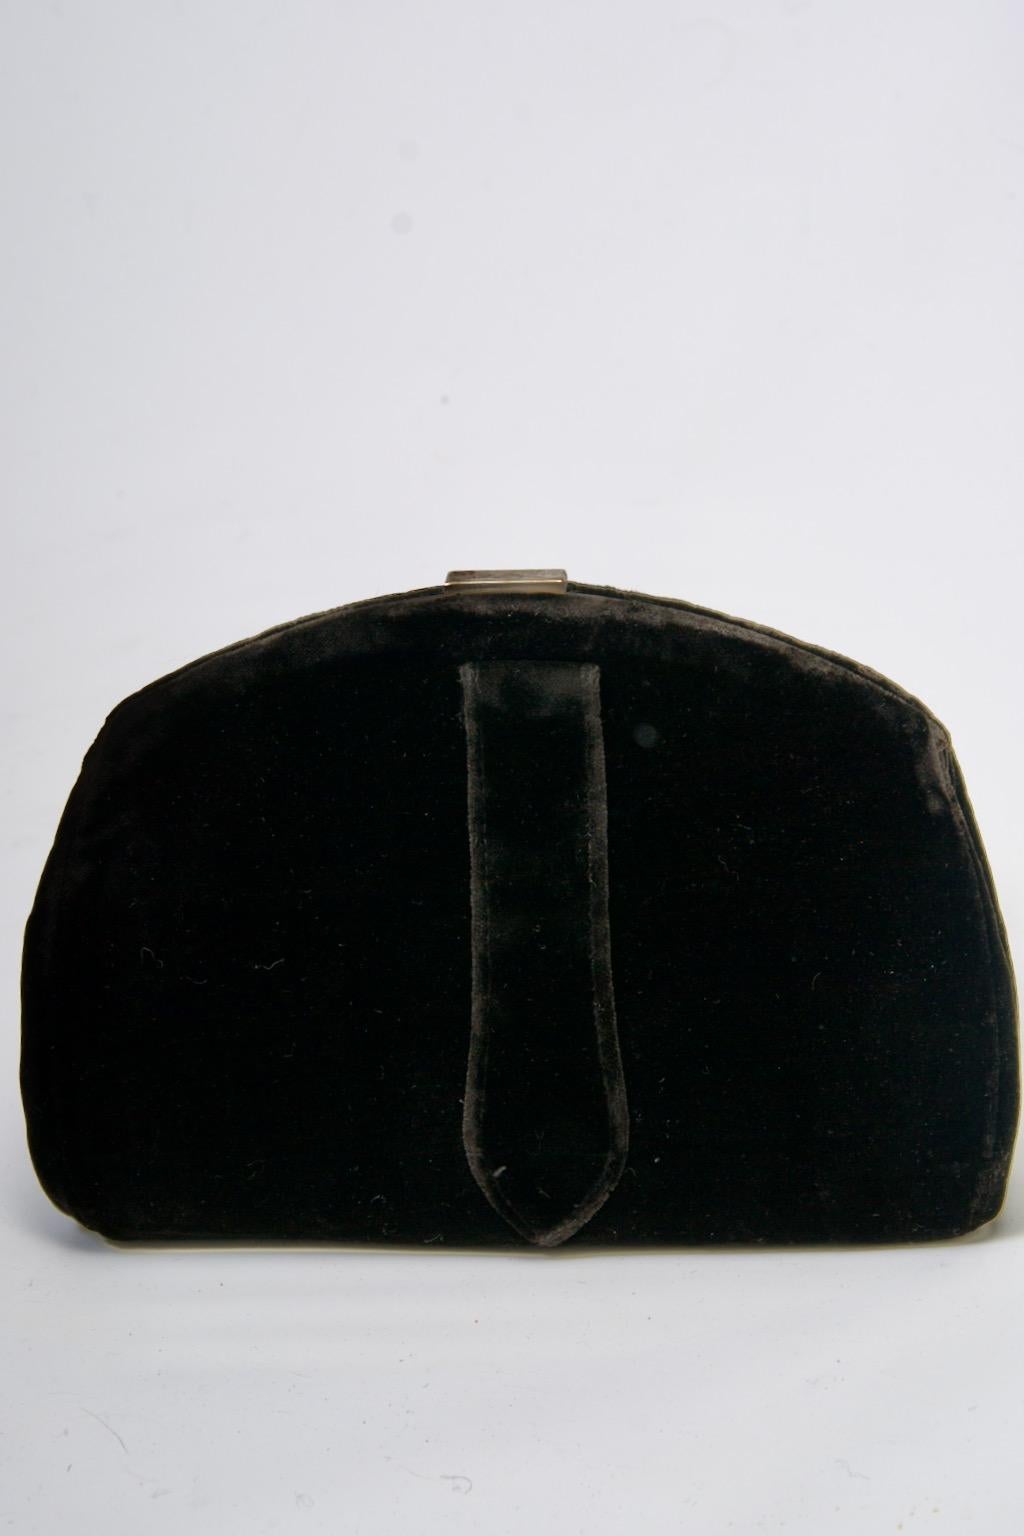 1930s Art Deco Velvet Clutch In Good Condition For Sale In Alford, MA